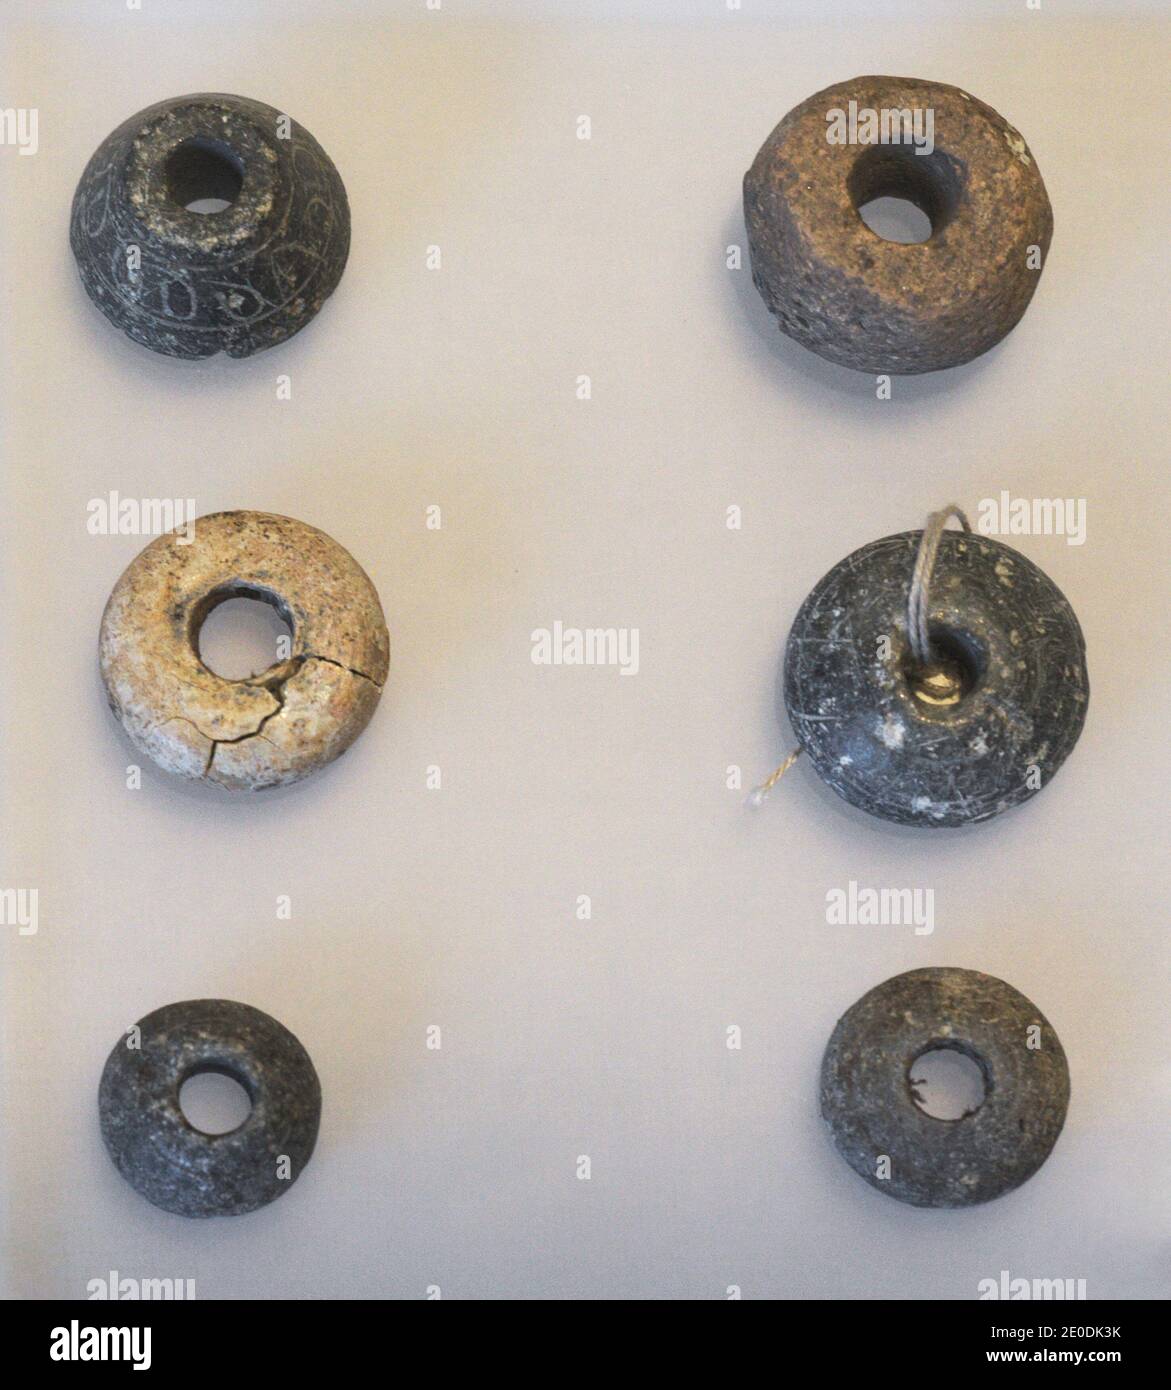 Textile industry. Middle Ages. Decorated spindle whorl. They were placed in the spindle as a counterweight. From the Tower of Hércules (La Coruña, Galicia, Spain. Archaeological and History Museum (San Anton Castle). A Coruña, Galicia, Spain. Stock Photo